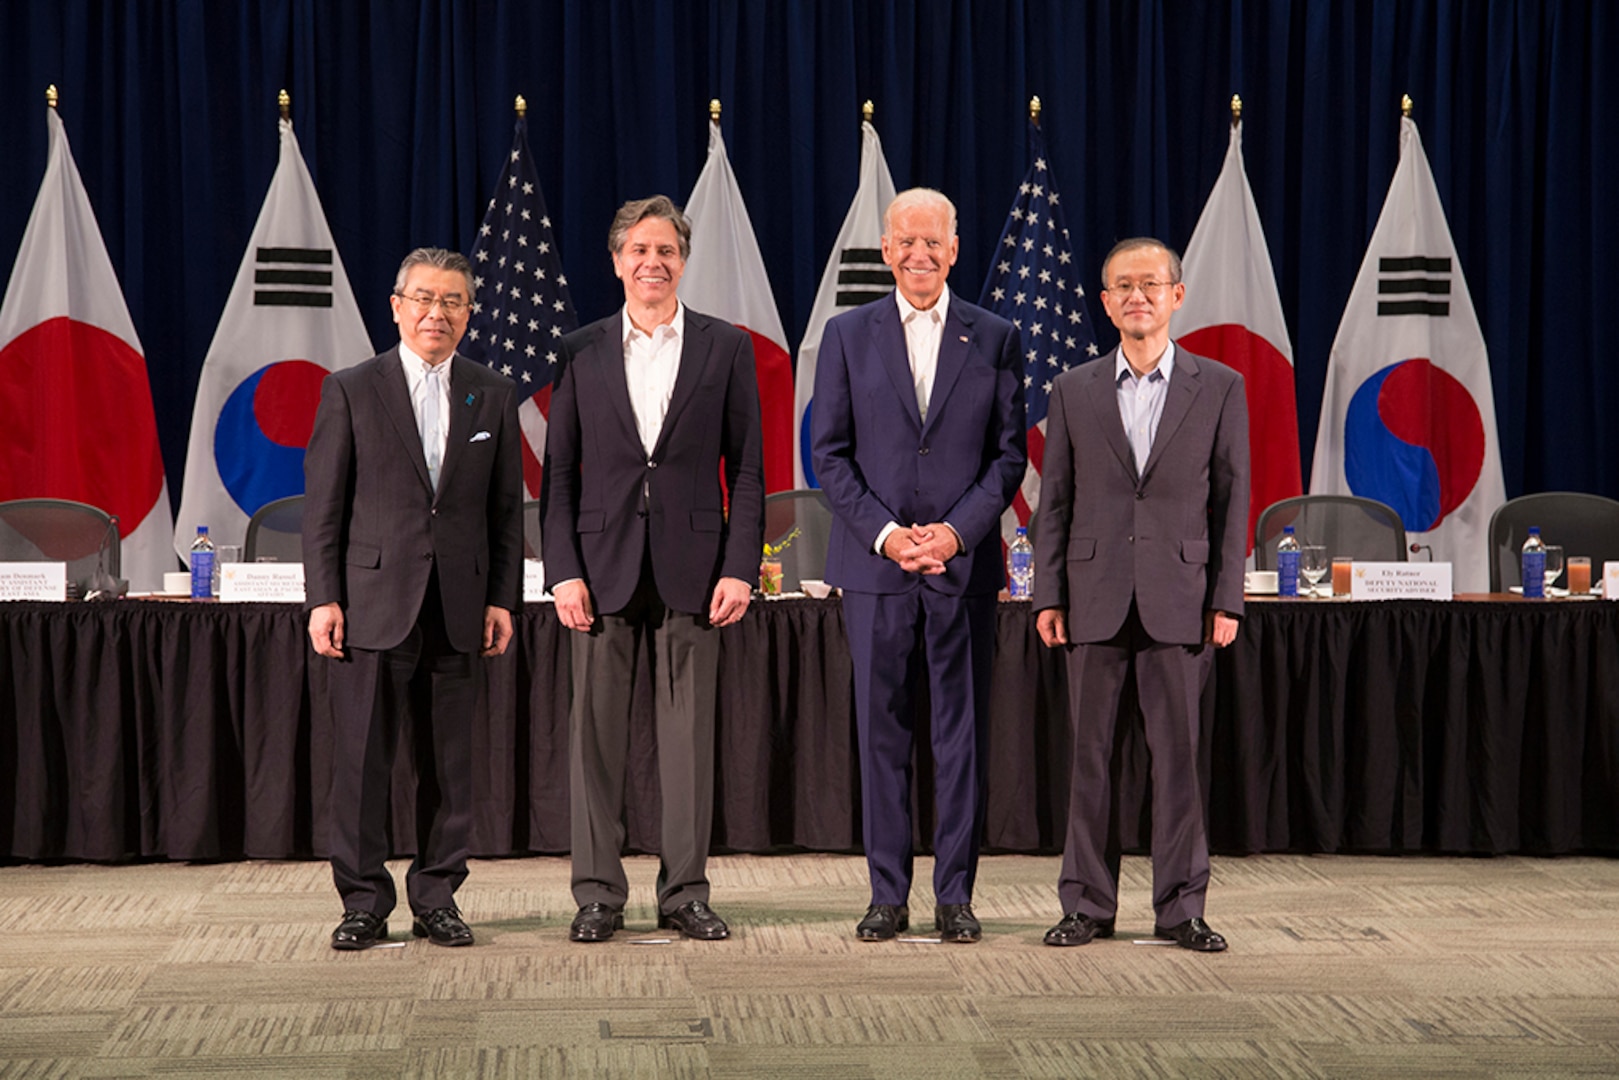 (July 3, 2016) - U.S. Vice President Joseph Biden (second from right) is pictured here with leaders of the Japan, Korea and U.S. delegations taking part in the July 14 trilateral discussions at the Daniel K. Inouye Asia-Pacific Center for Security Studies in Honolulu. From left to right are Japan’s Vice Minister of Foreign Affairs Shinsuke Sugiyama, U.S. Deputy Secretary of State Tony Blinken, and Republic of Korea Vice Minister of Foreign Affairs Lim Sung-Nam.